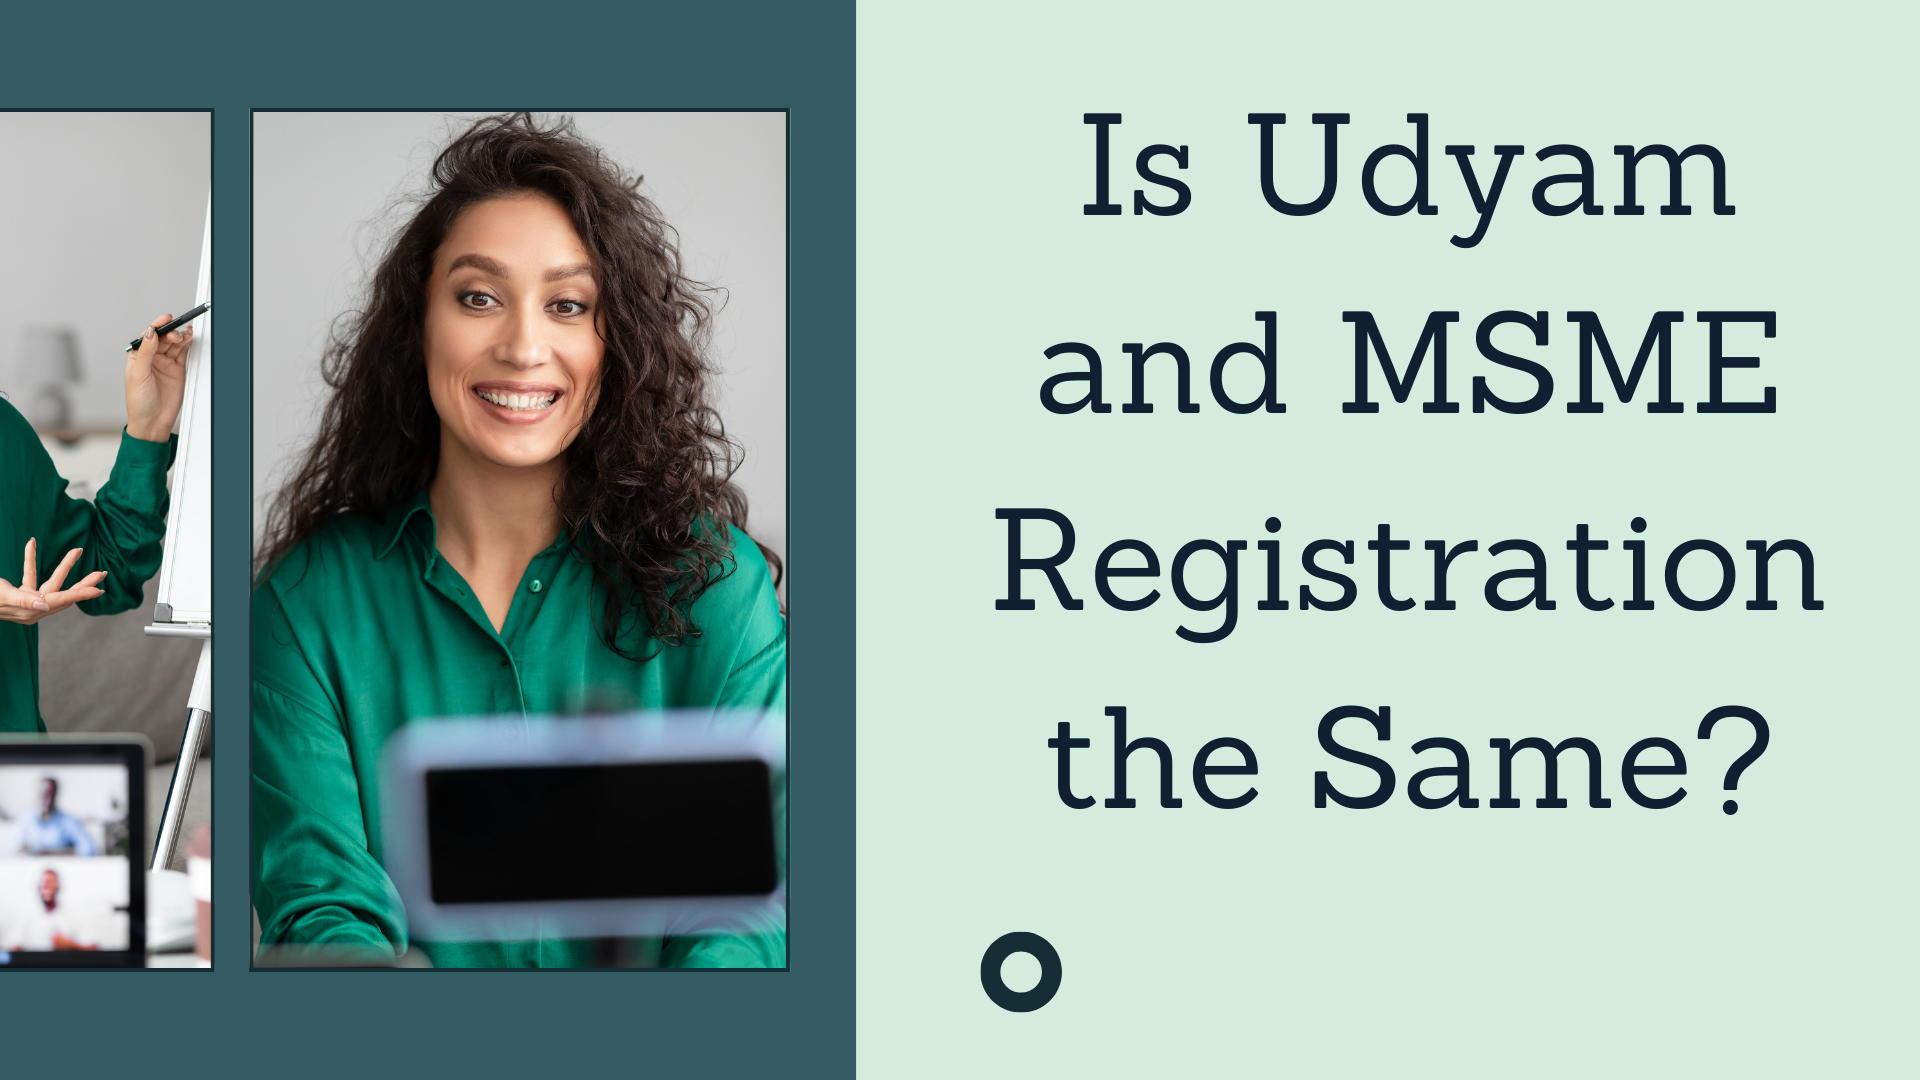 Is Udyam and MSME Registration the Same